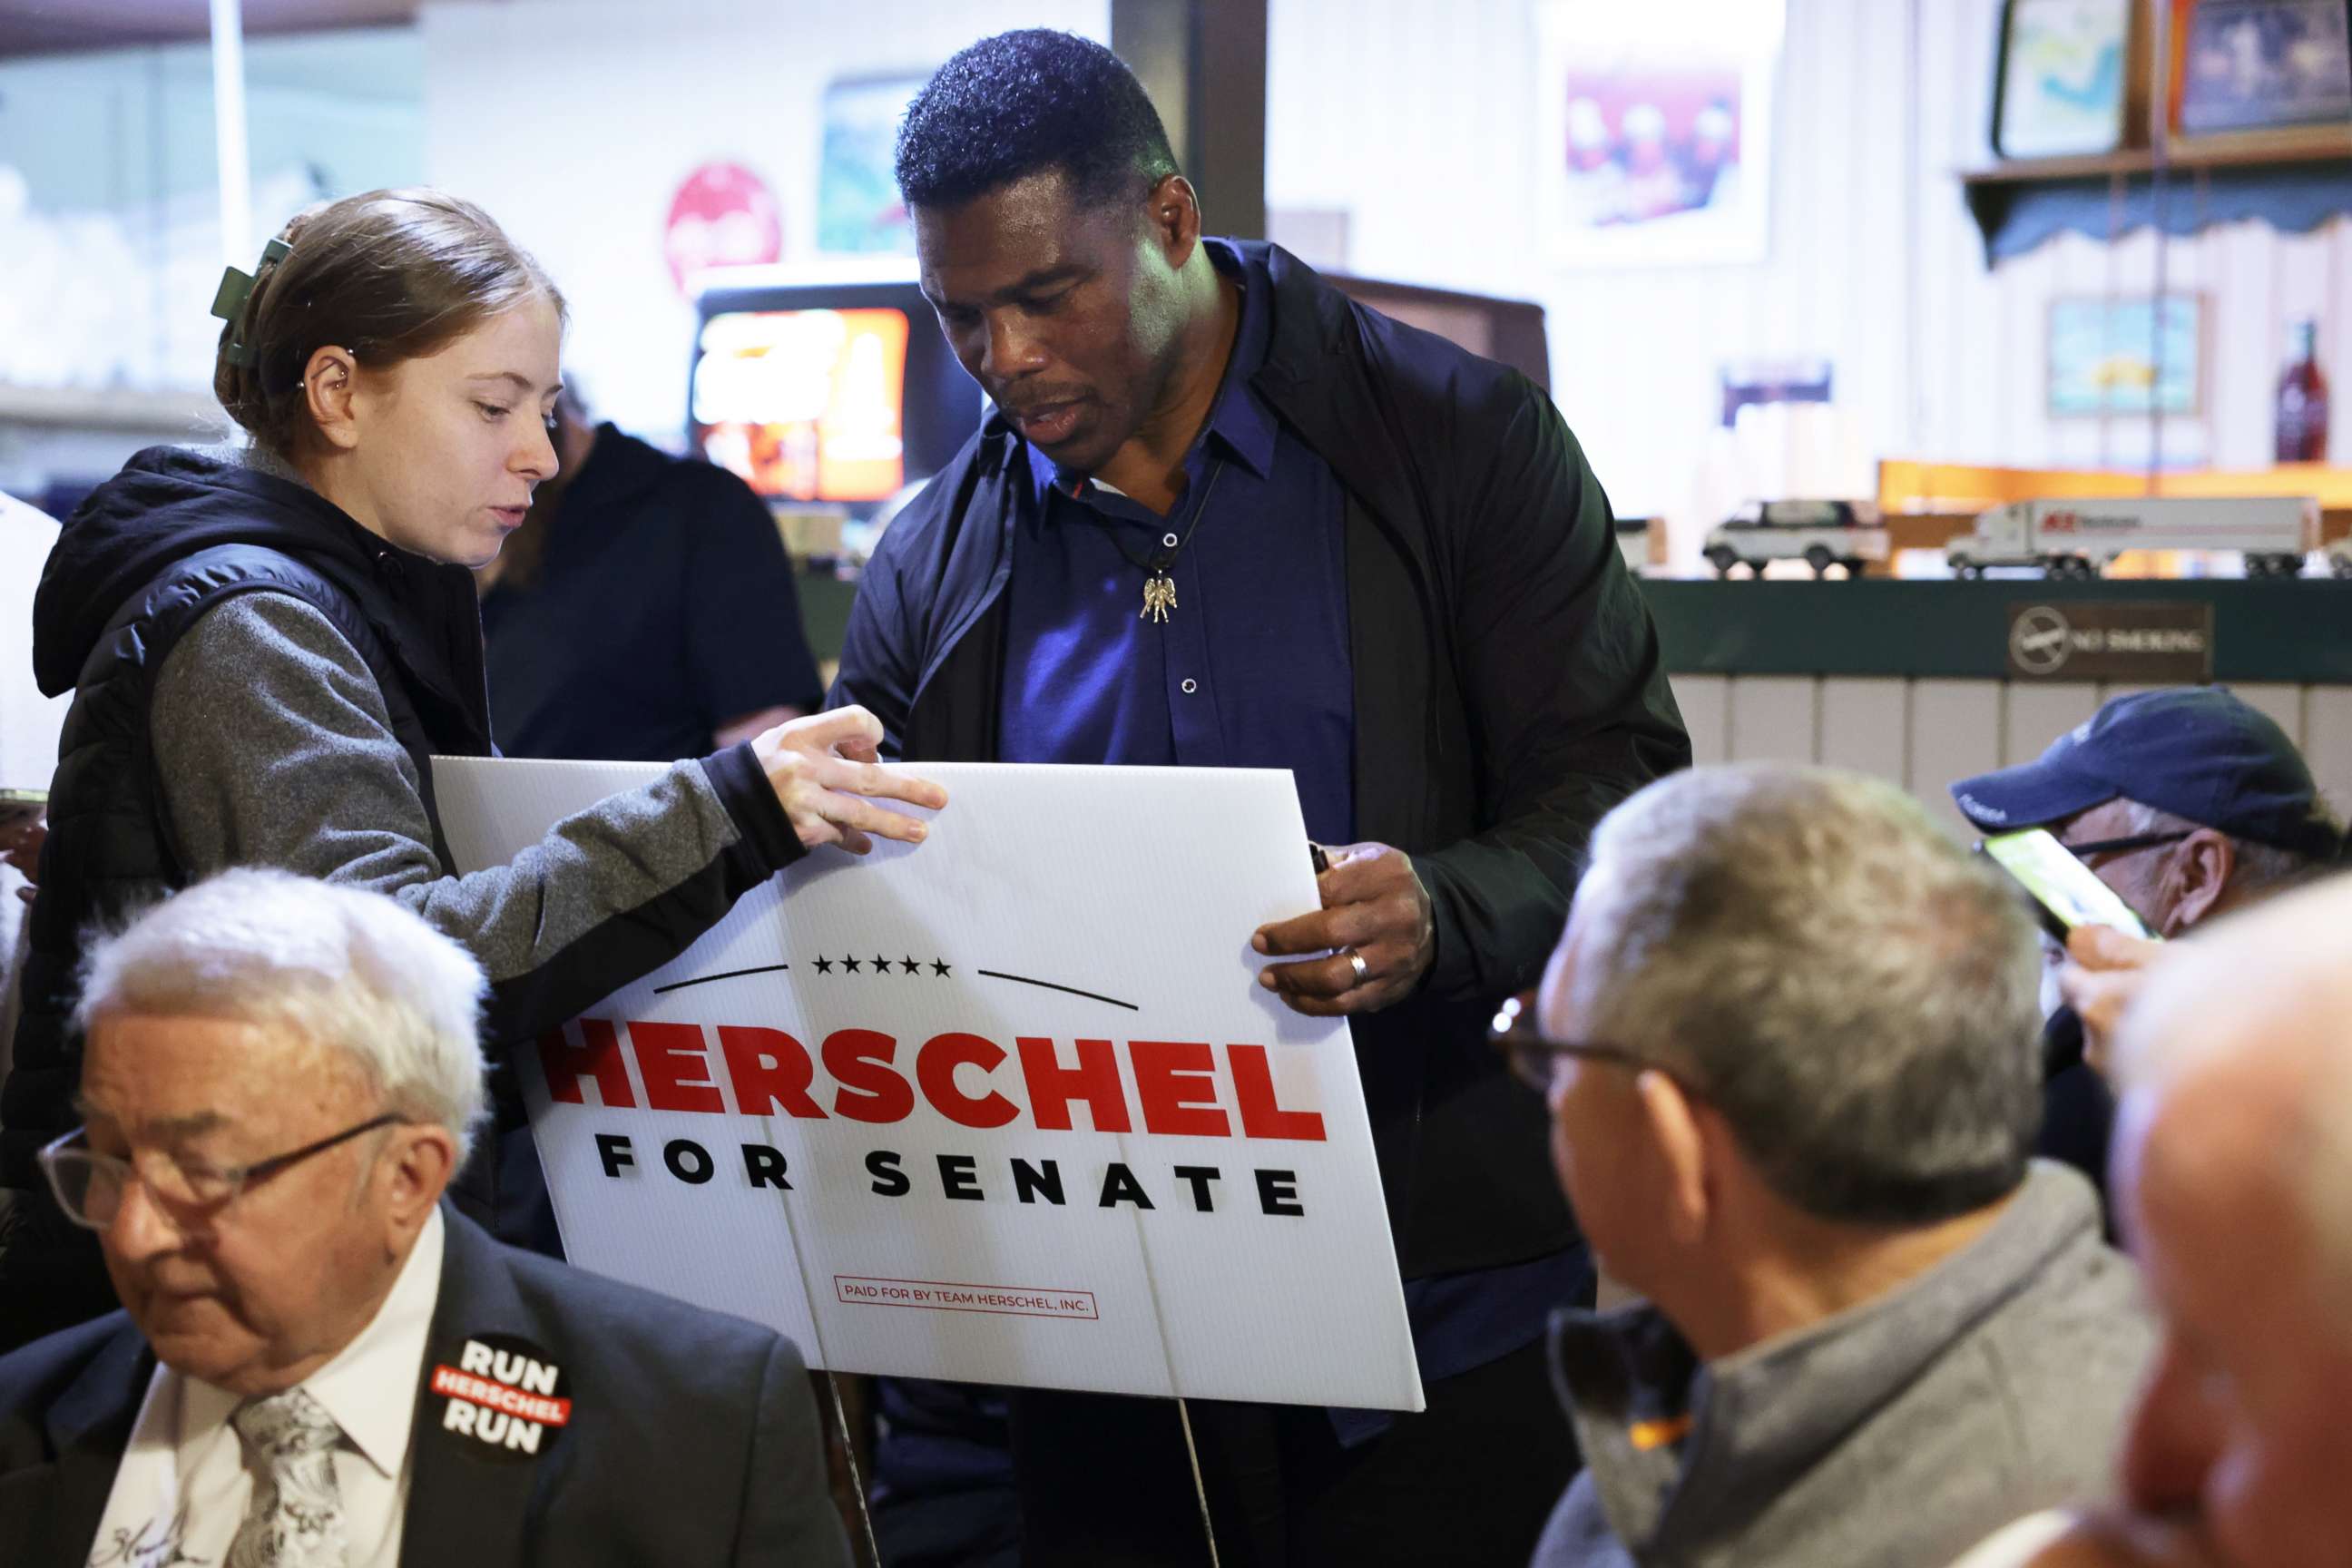 PHOTO: Georgia Republican senate candidate Herschel Walker signs autograph for a supporter during a campaign stop, Dec. 5, 2022, in Flowery Branch, Georgia.